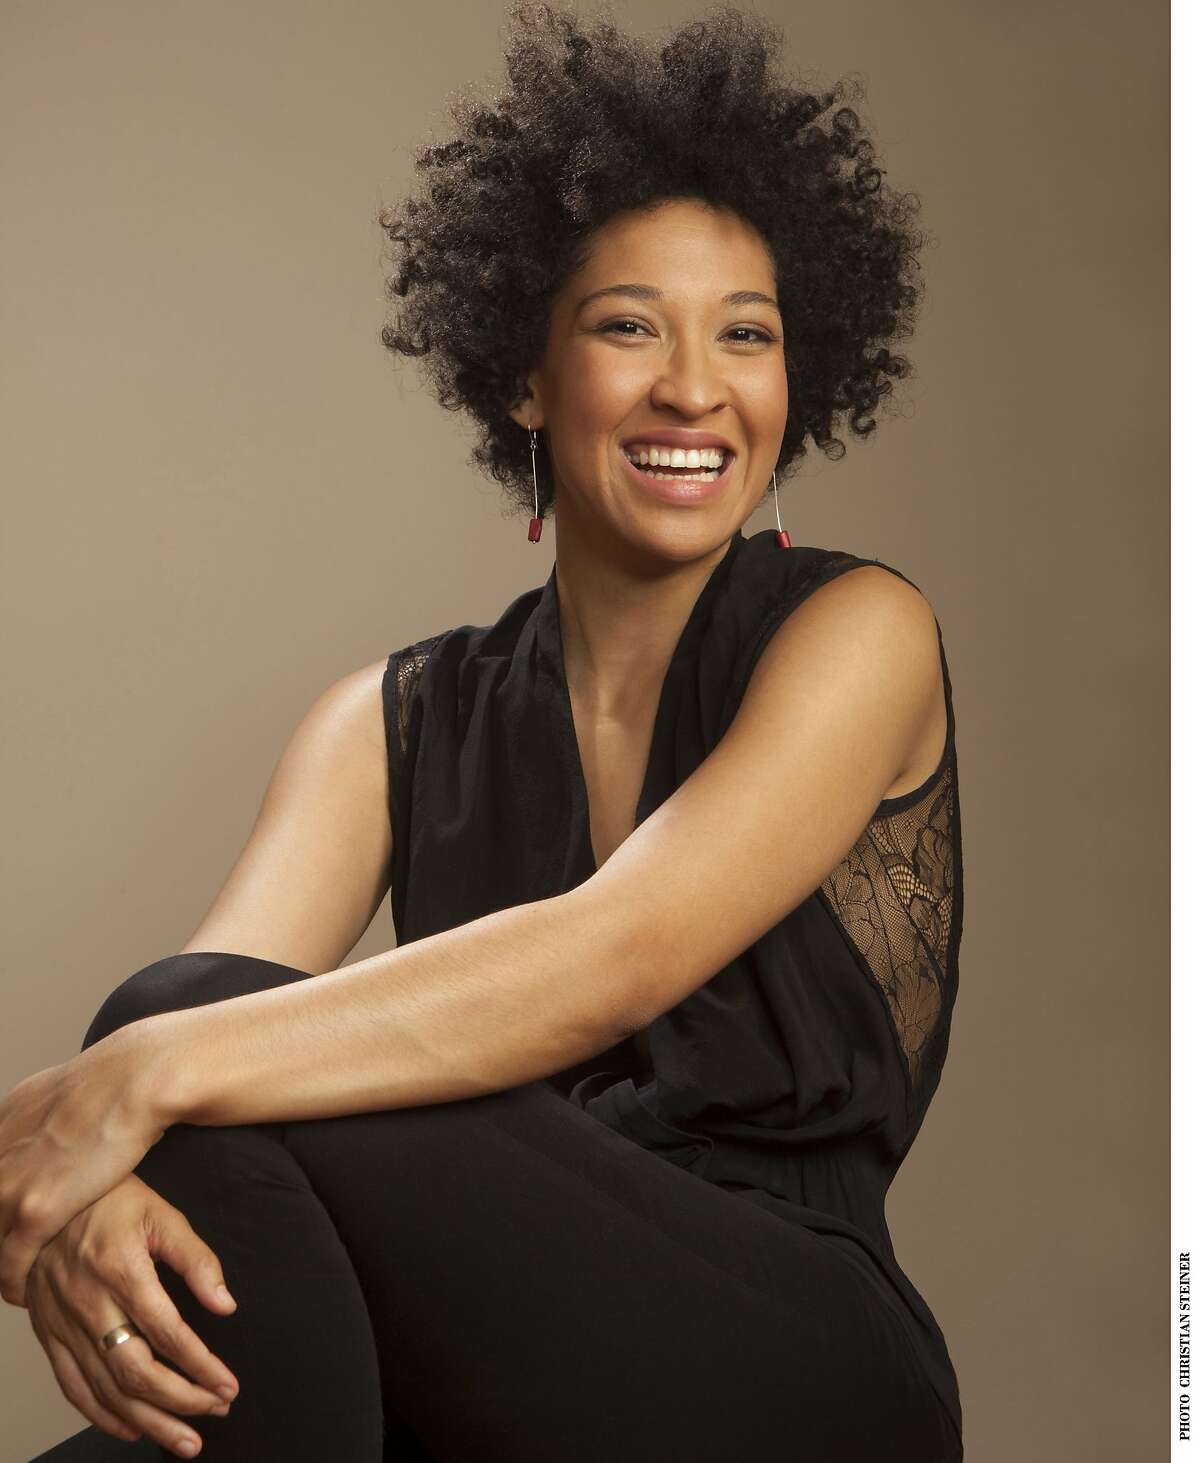 Soprano Julia Bullock, who will be performing a concert with pianist John Arida, for Cal Performances.